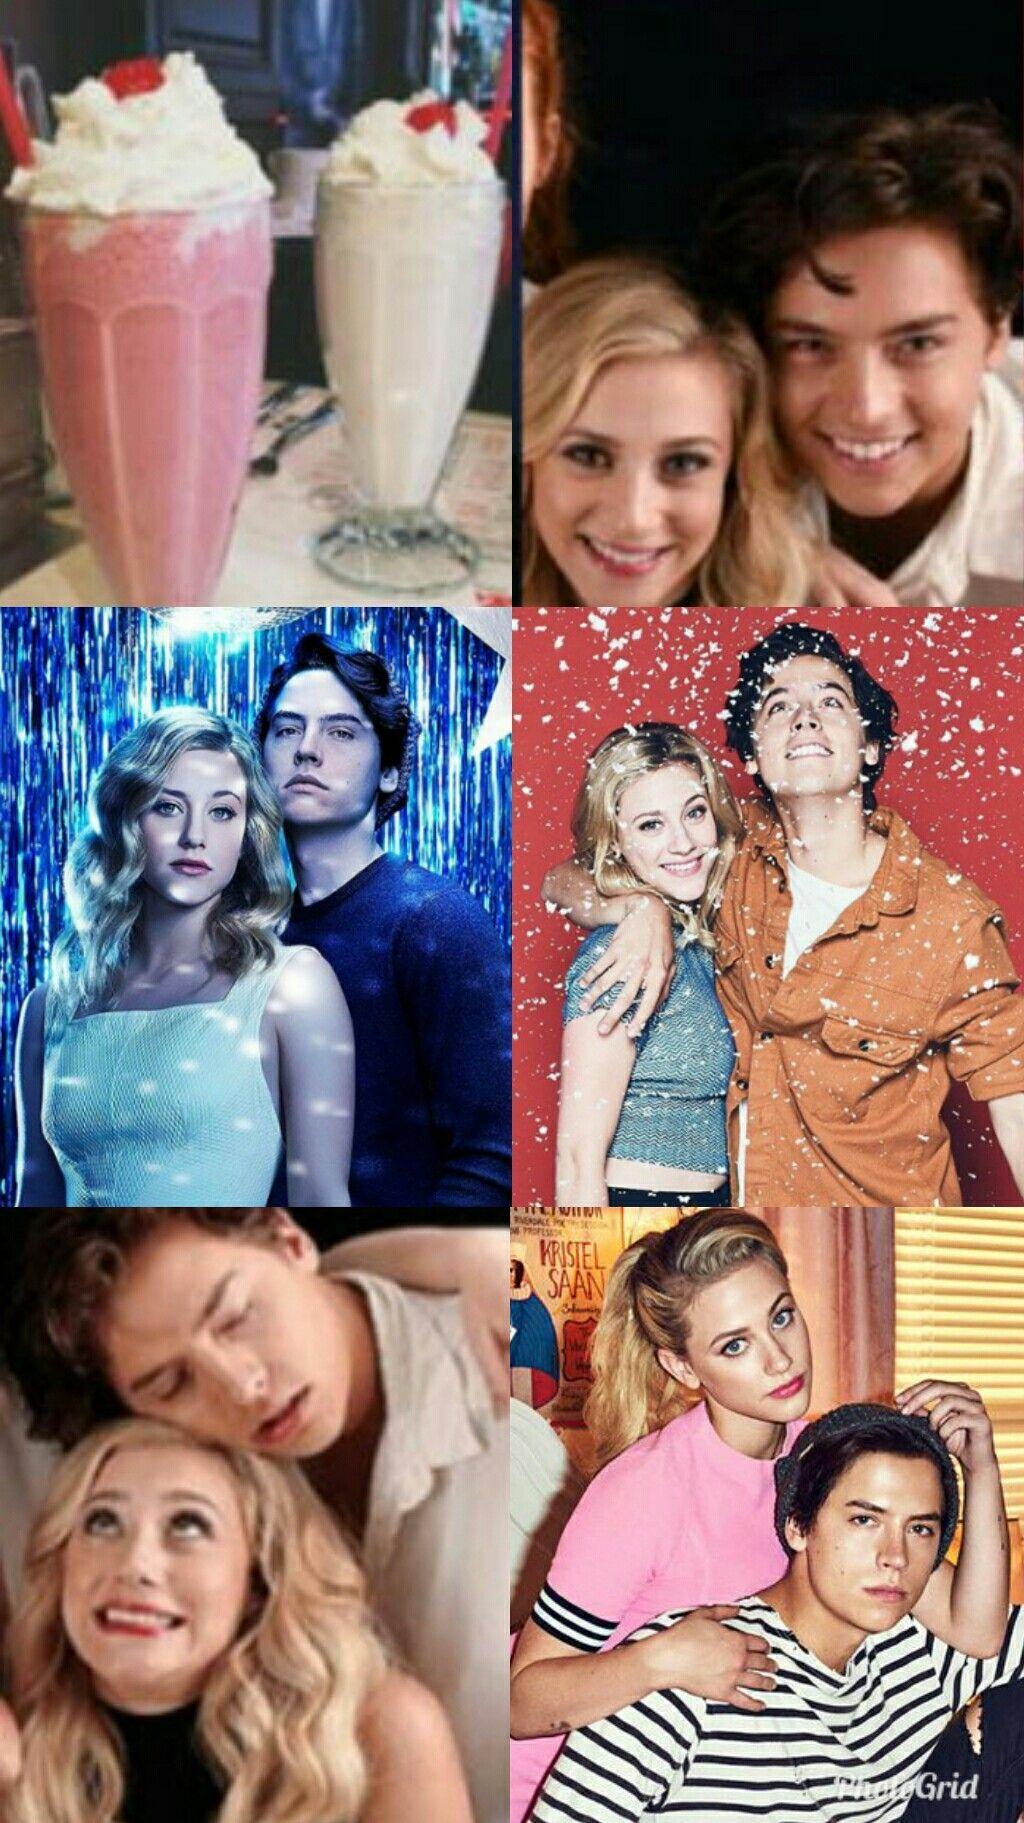 Bughead Wallpapers